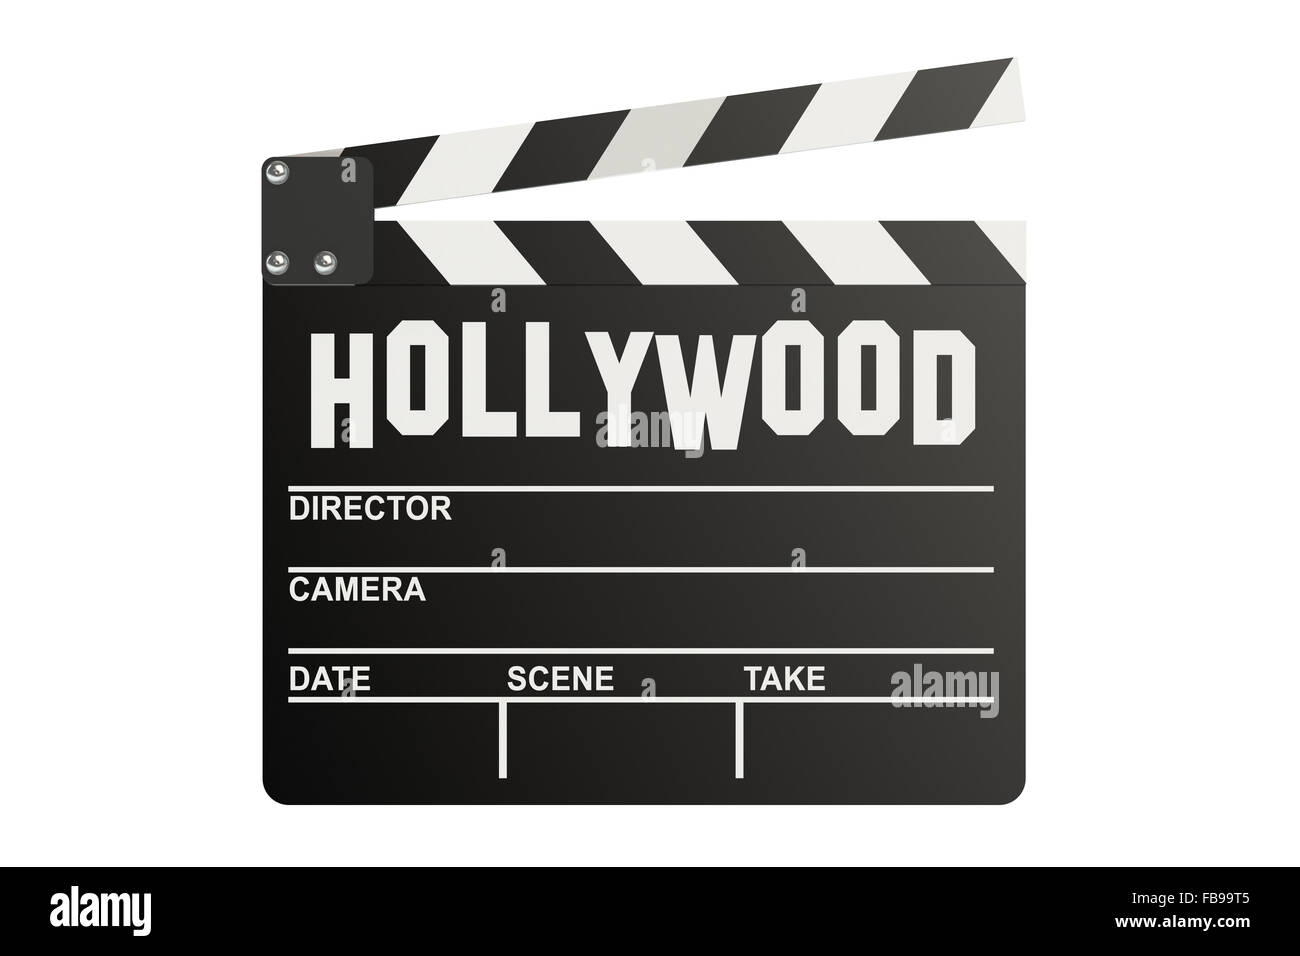 Hollywood Clapper Board Isolated On White Background Stock Photo Alamy